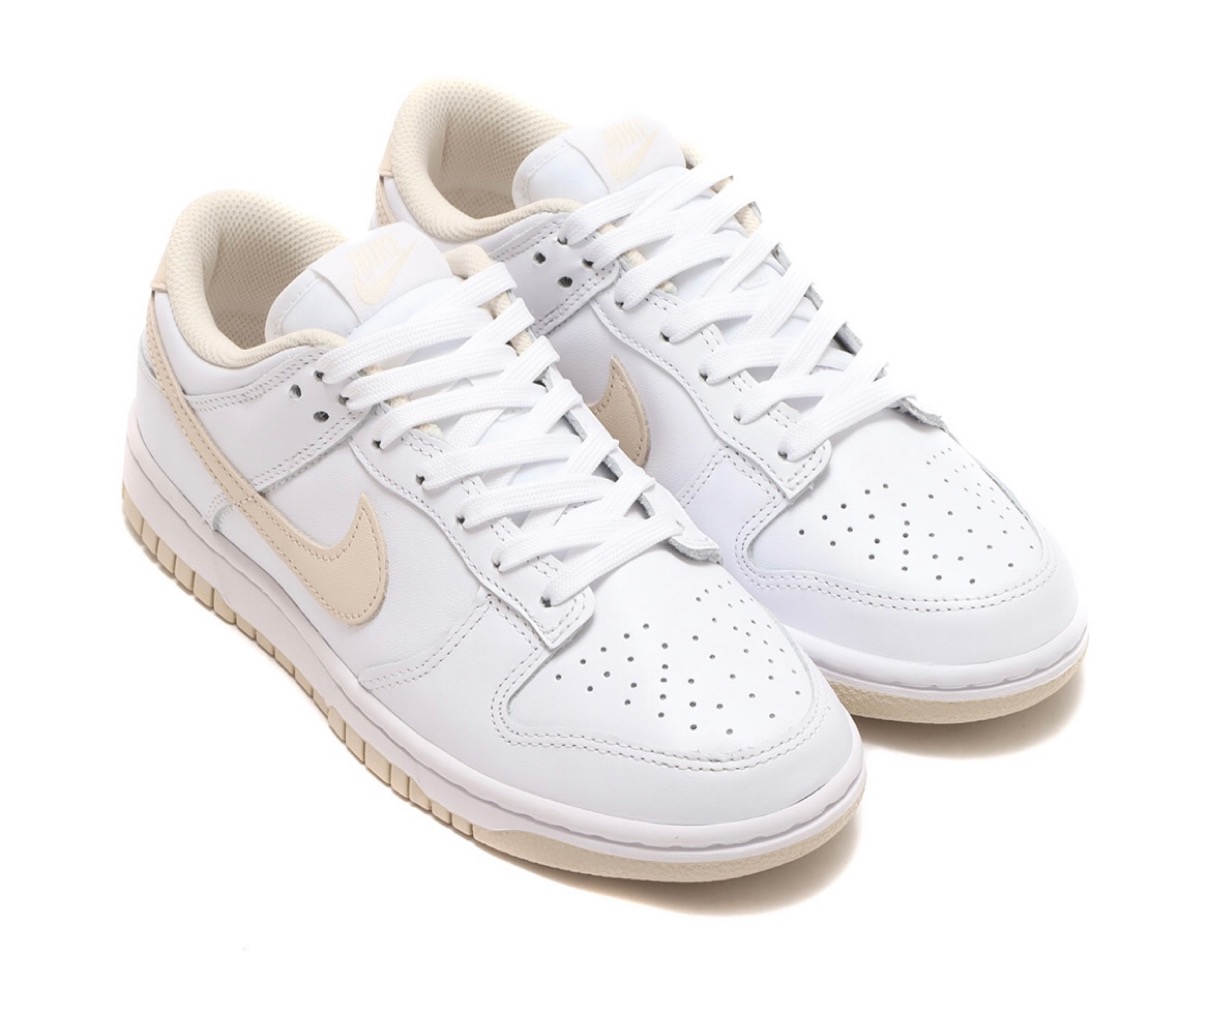 Nike Wmns Dunk Low “Pearl White”が国内9月25日/10月8日に発売予定 